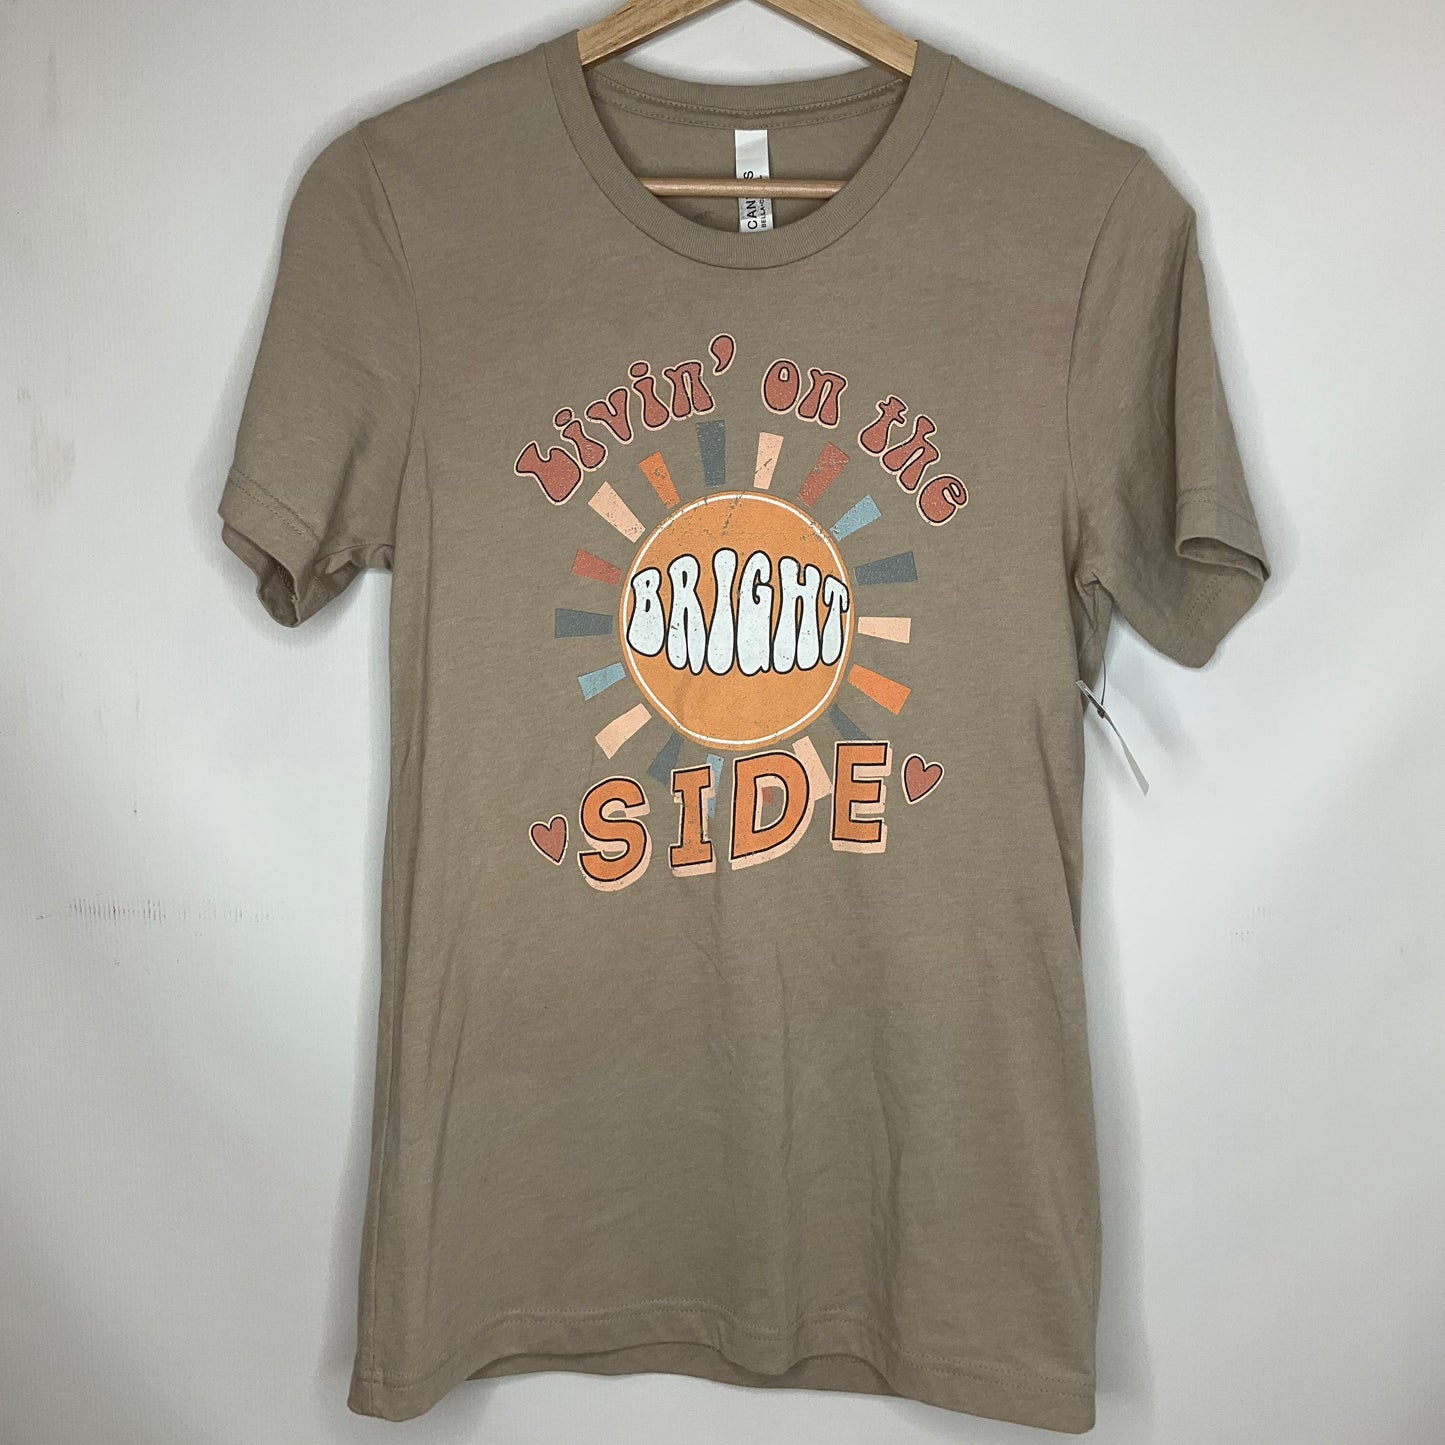 Tan Top Short Sleeve Canvasback, Size S